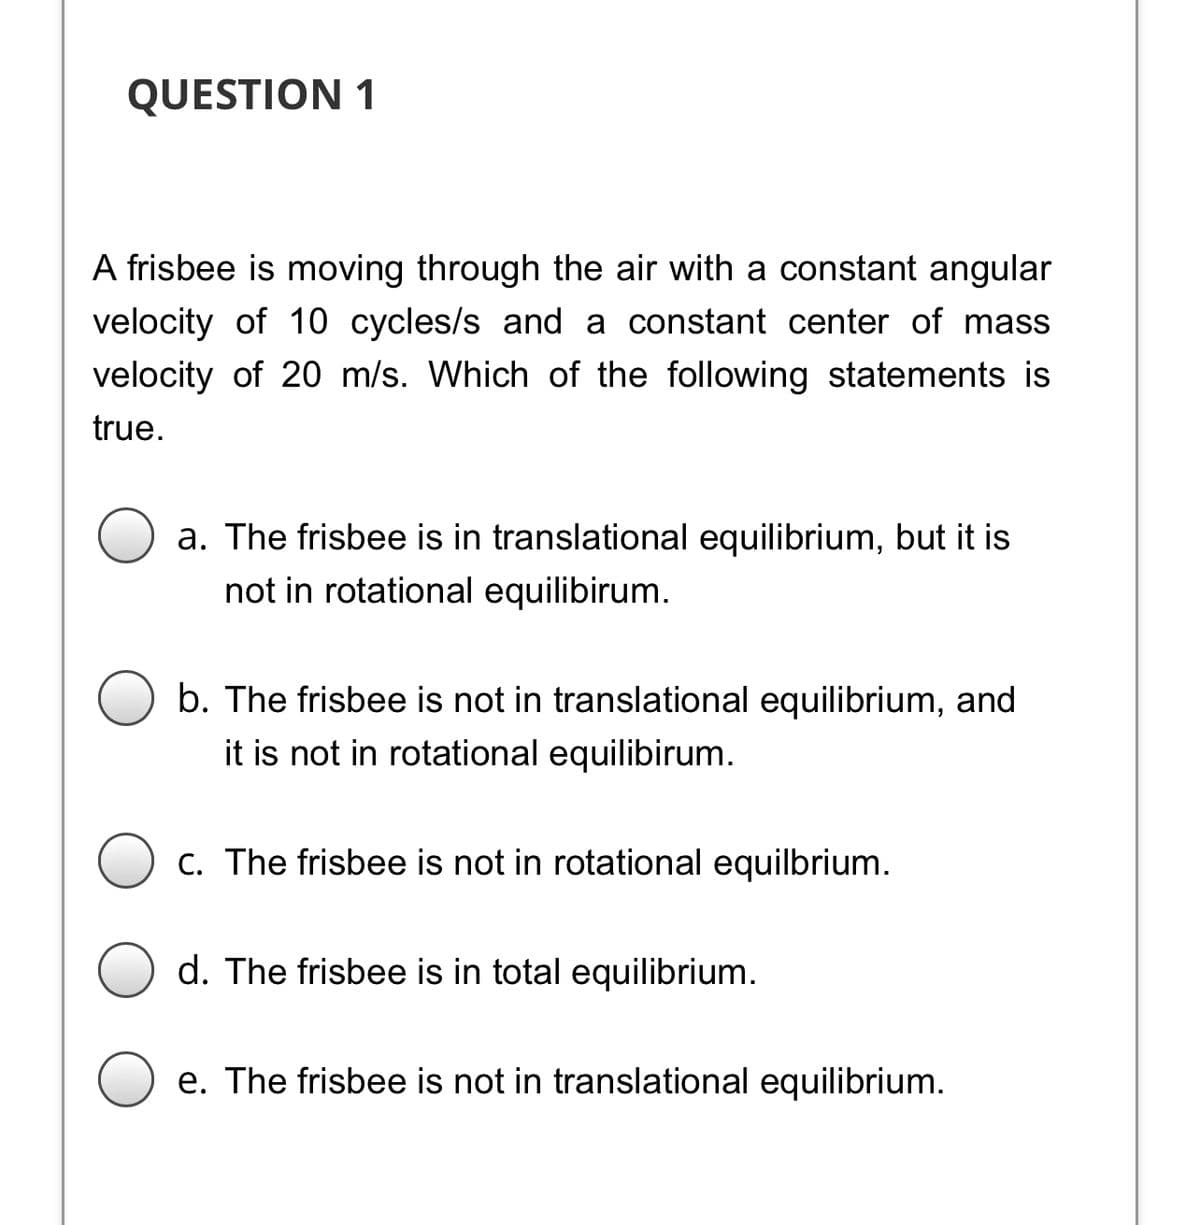 QUESTION 1
A frisbee is moving through the air with a constant angular
velocity of 10 cycles/s and a constant center of mass
velocity of 20 m/s. Which of the following statements is
true.
a. The frisbee is in translational equilibrium, but it is
not in rotational equilibirum.
b. The frisbee is not in translational equilibrium, and
it is not in rotational equilibirum.
C. The frisbee is not in rotational equilbrium.
d. The frisbee is in total equilibrium.
e. The frisbee is not in translational equilibrium.
